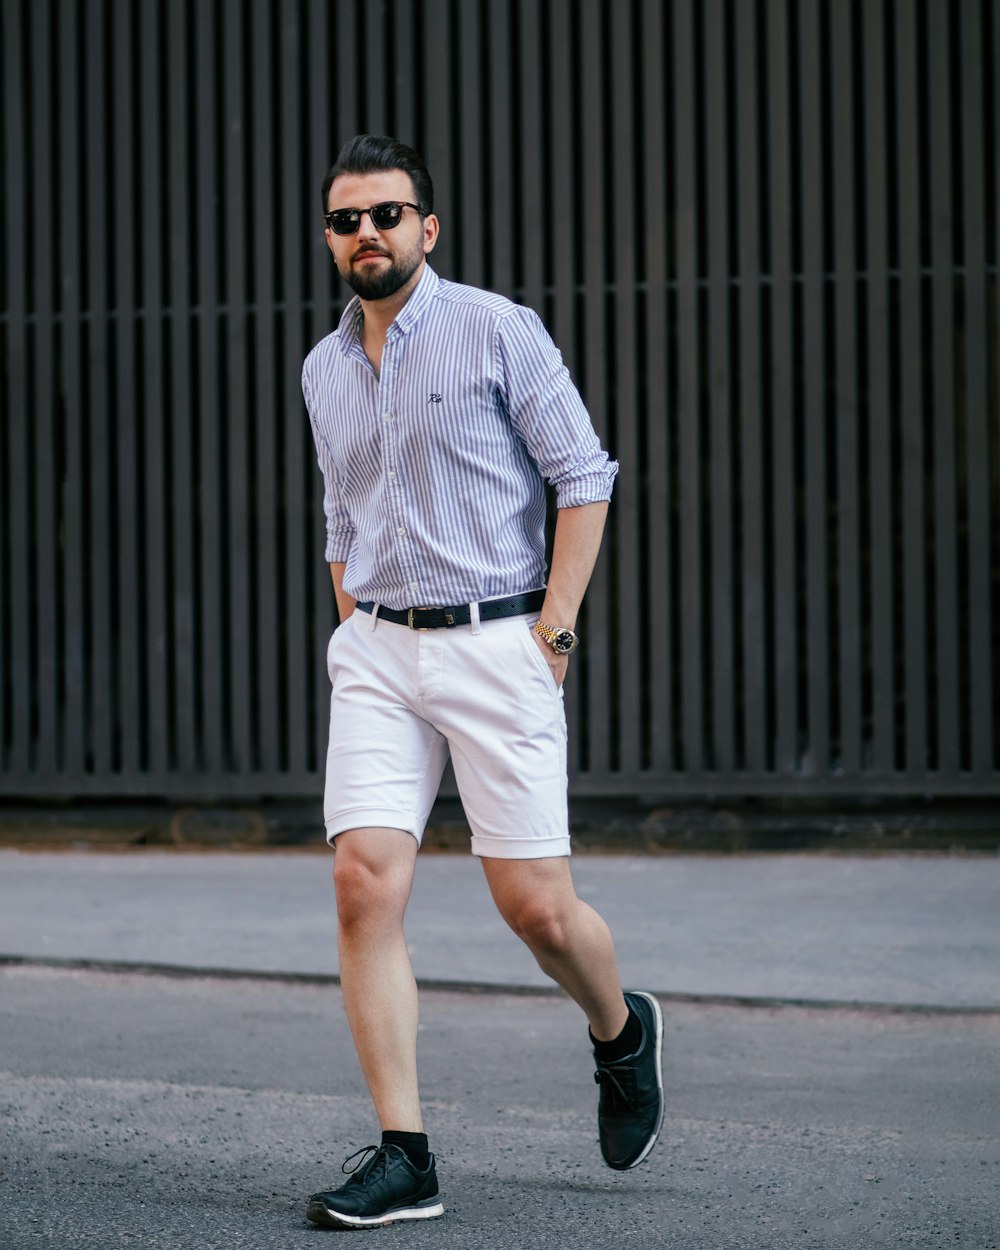 a man walking down the street in shorts